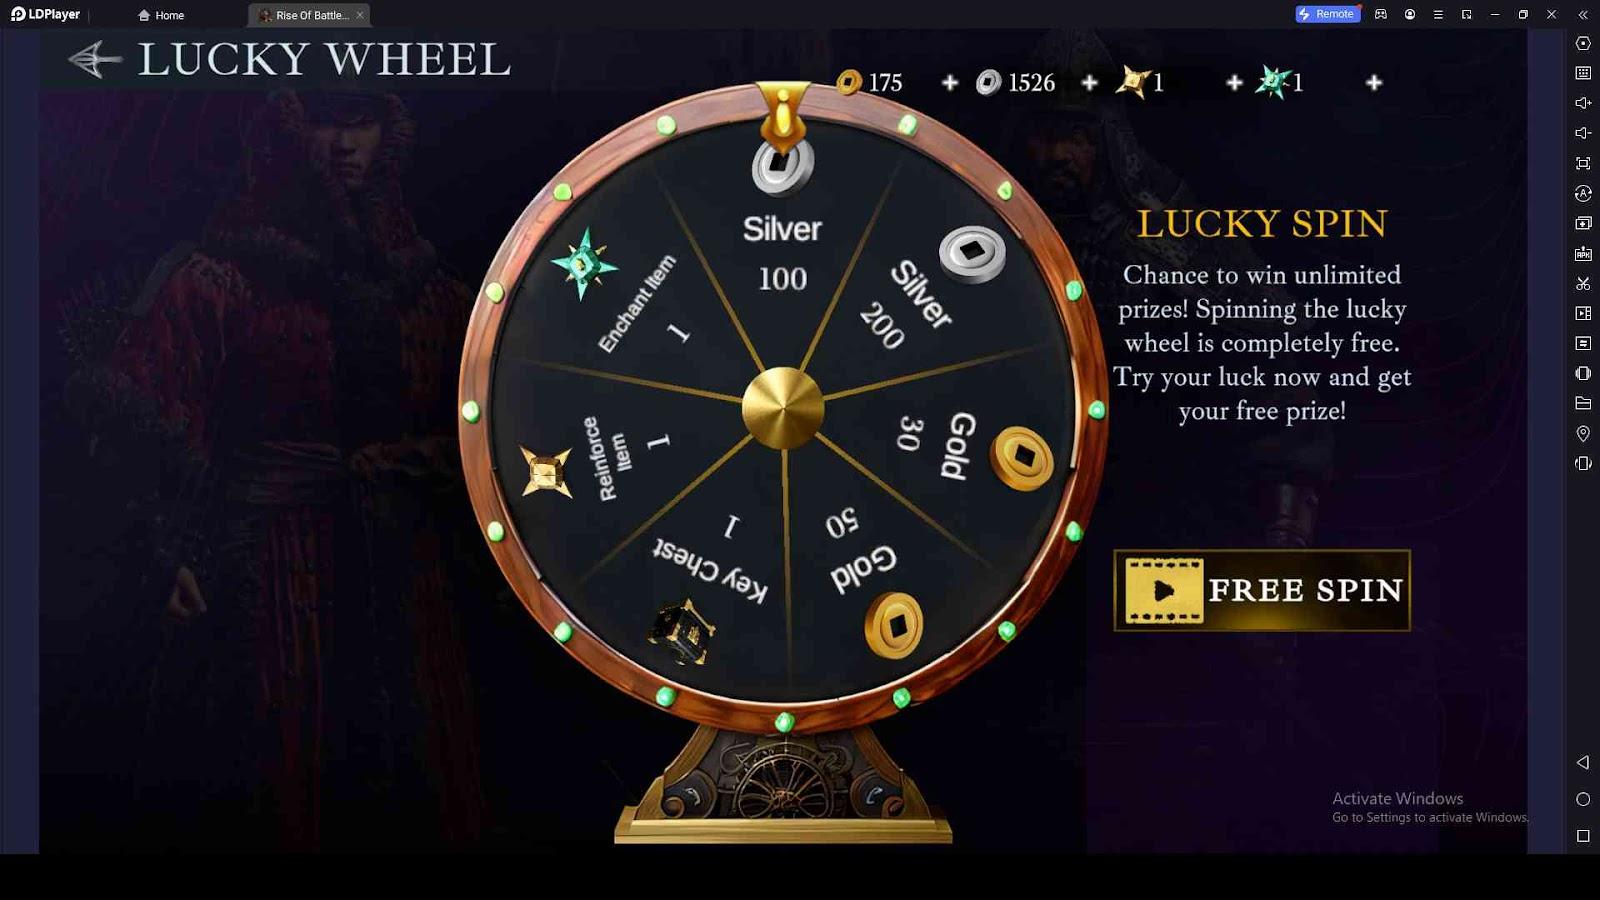 Spin the Lucky Spin